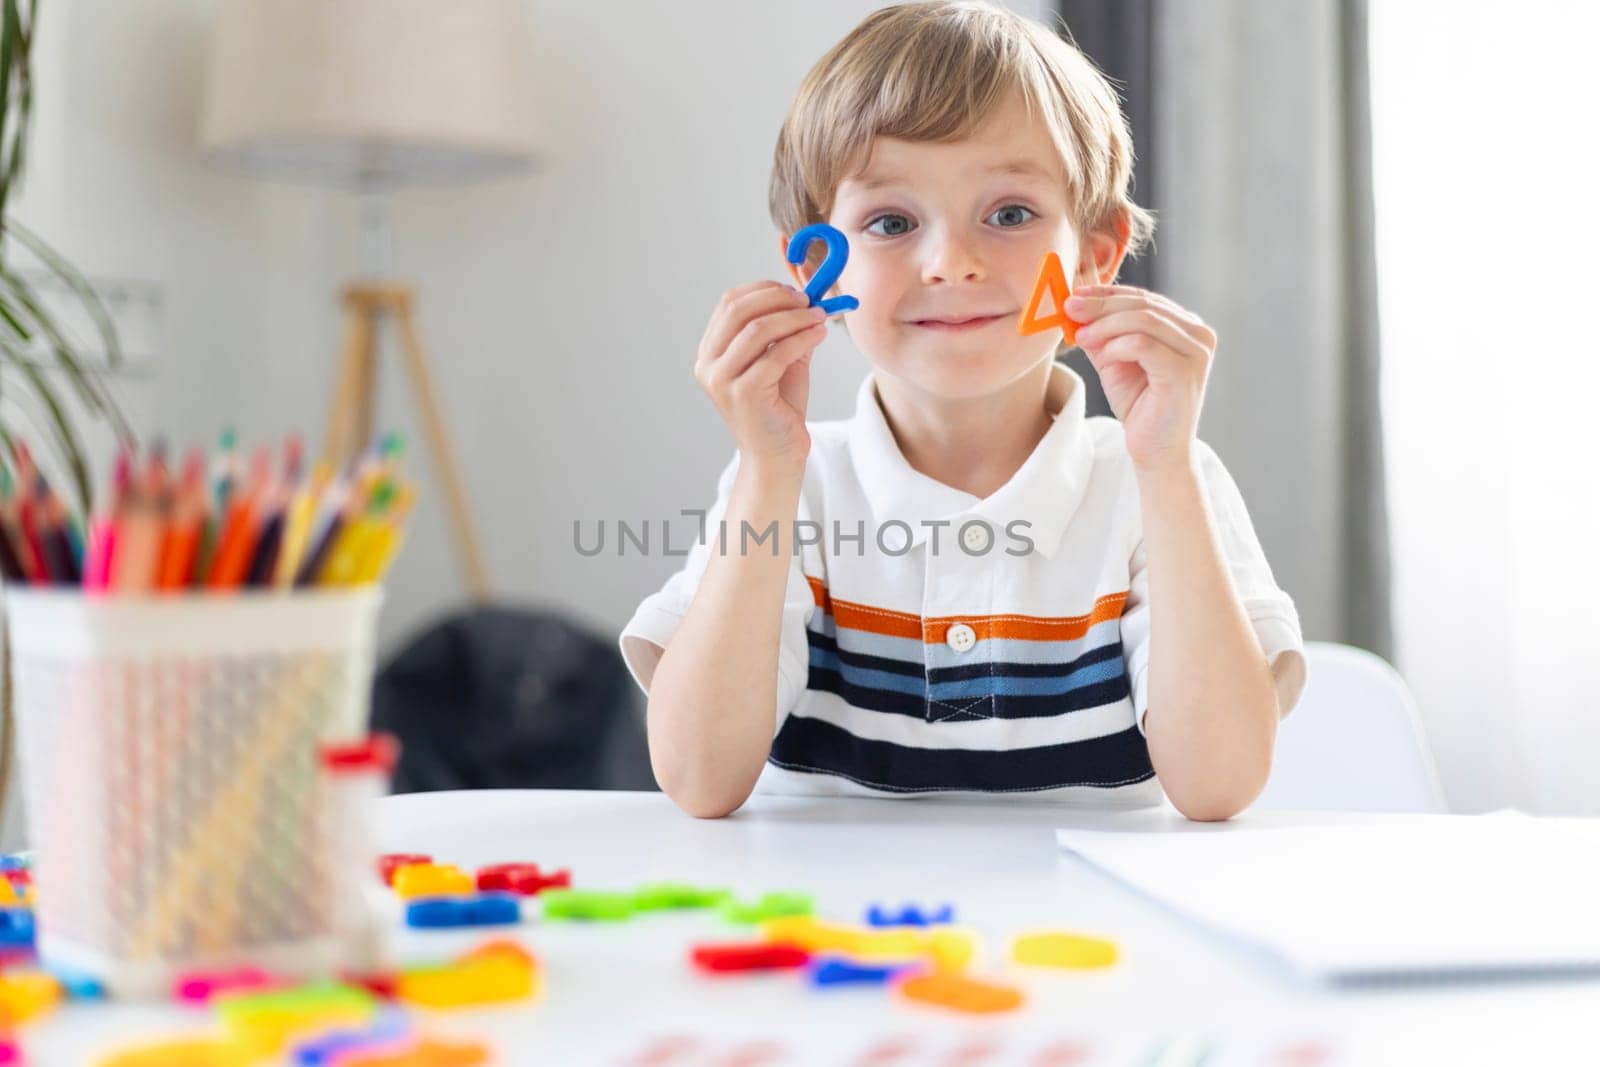 Young Boy Learning Shapes During Homeschooling Session by andreyz